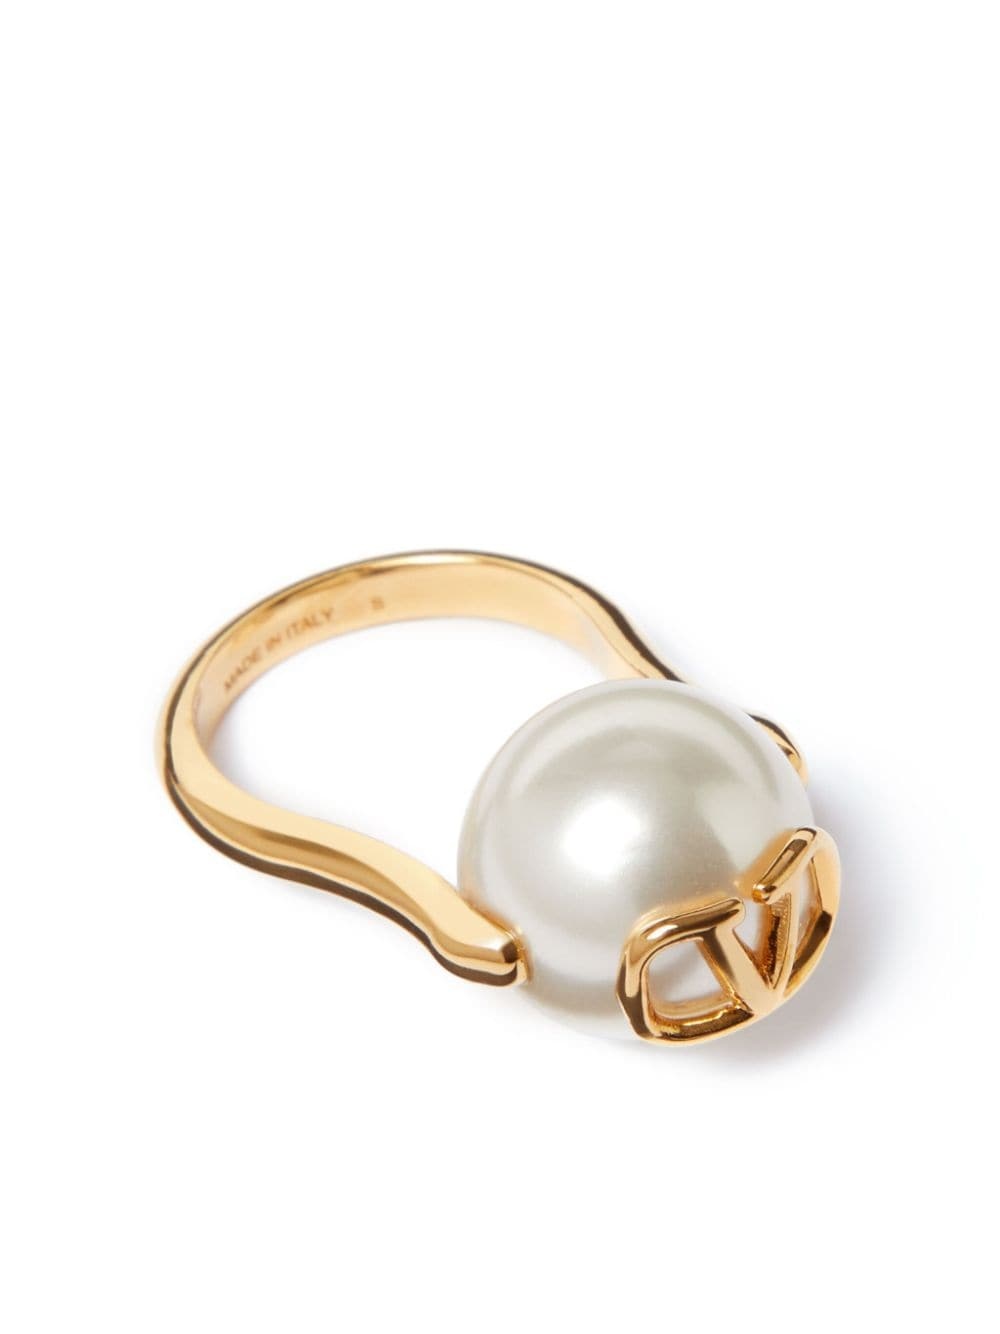 VLogo Signature faux-pearl ring - 1